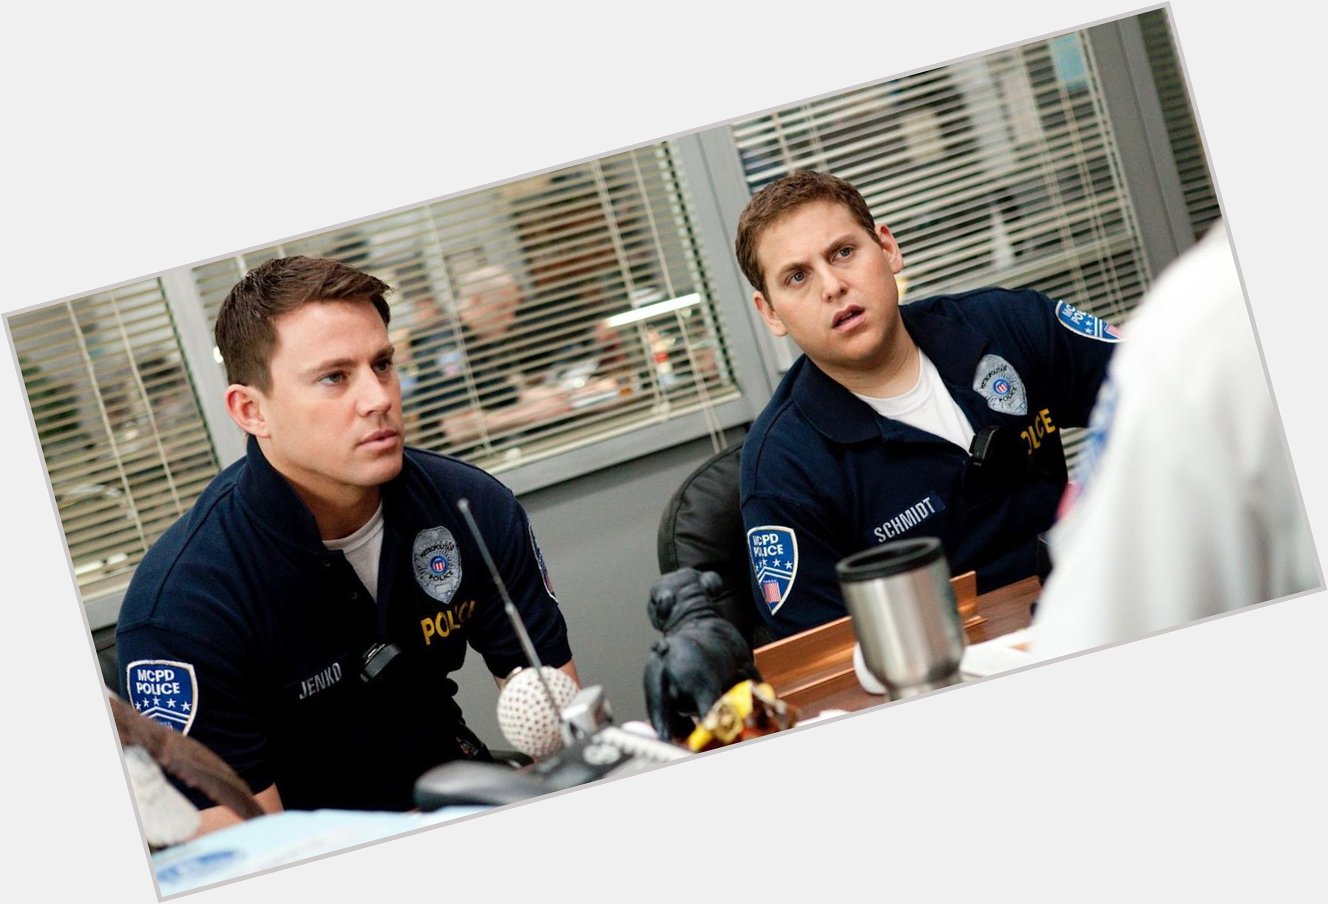 Happy Birthday to Channing Tatum(left) who turns 37 today! 